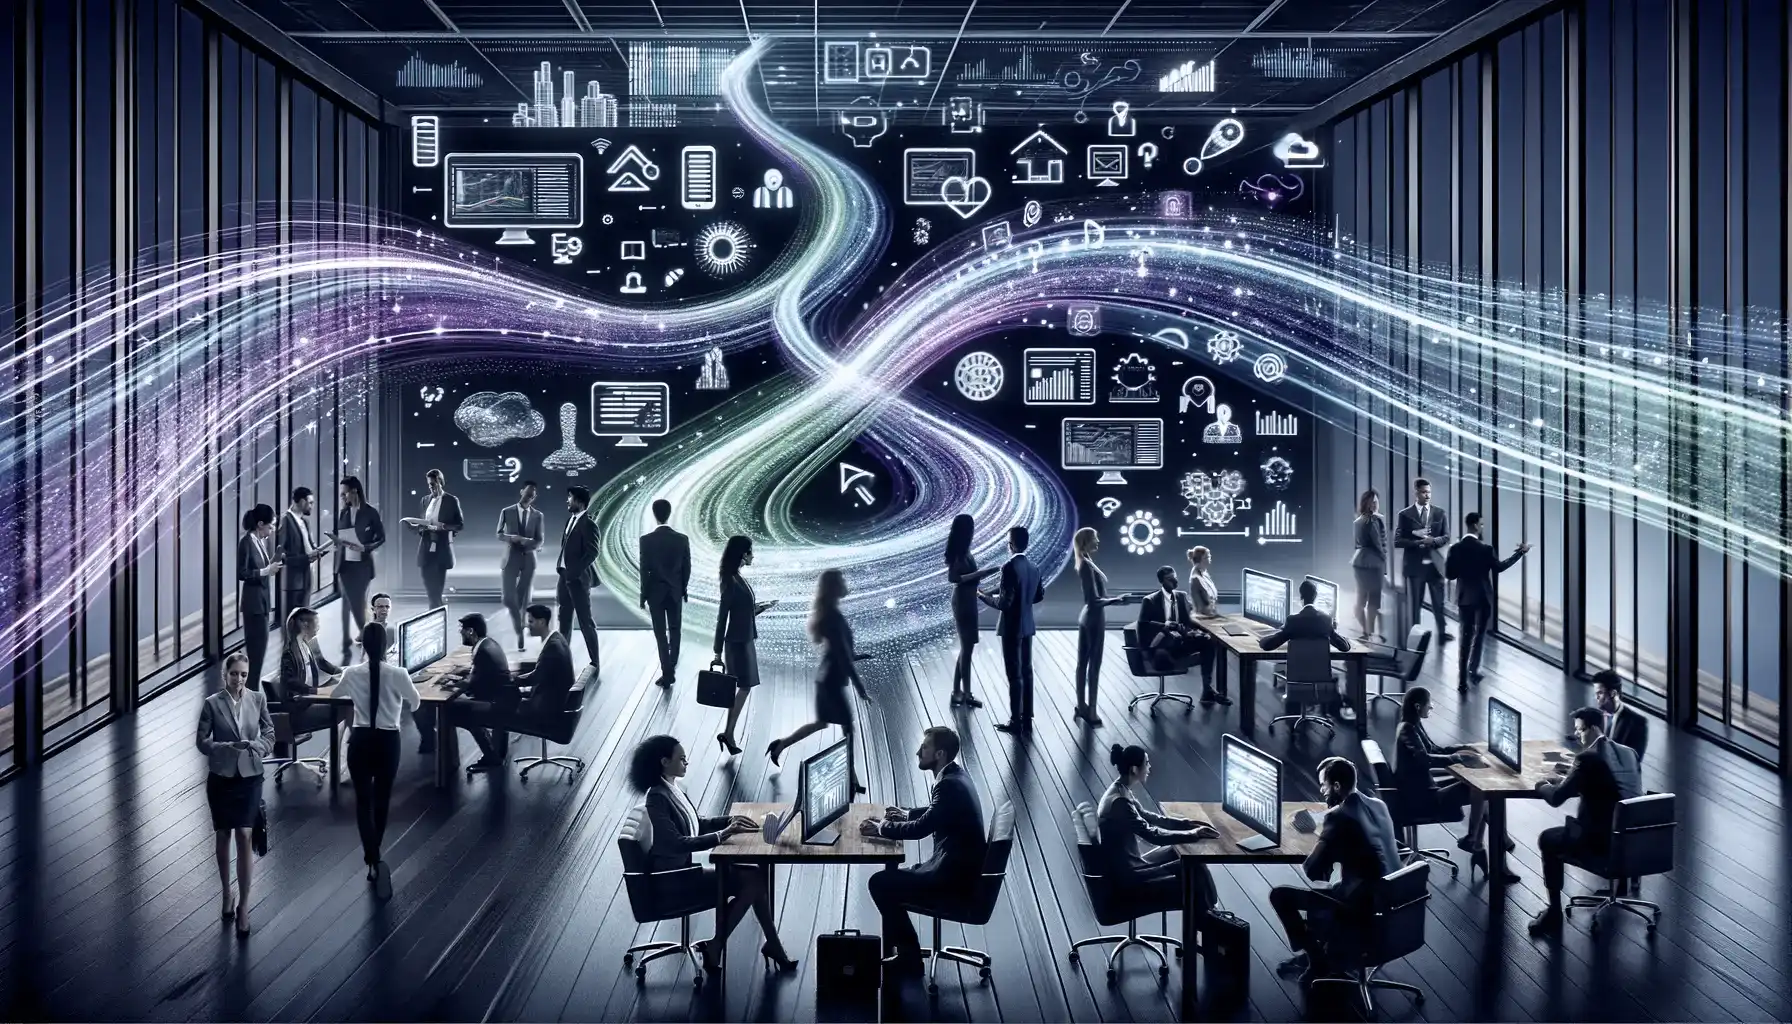 This 16x9 image depicts a modern office scene with business professionals, diverse in gender and ethnicity, engaging in various work activities. The central theme is the digitization of processes, illustrated by bright purple and green neon lights that represent digital code. These neon streams flow between the individuals, symbolizing the connectivity and integration brought about by NexGenTek's enterprise app development. The office environment is contemporary and technology-focused, with visible screens displaying advanced interfaces and applications. This visual metaphor highlights how NexGenTek's solutions facilitate significant operational changes and enhance customer experiences, effectively addressing both traditional and emerging business challenges to improve enterprise performance.